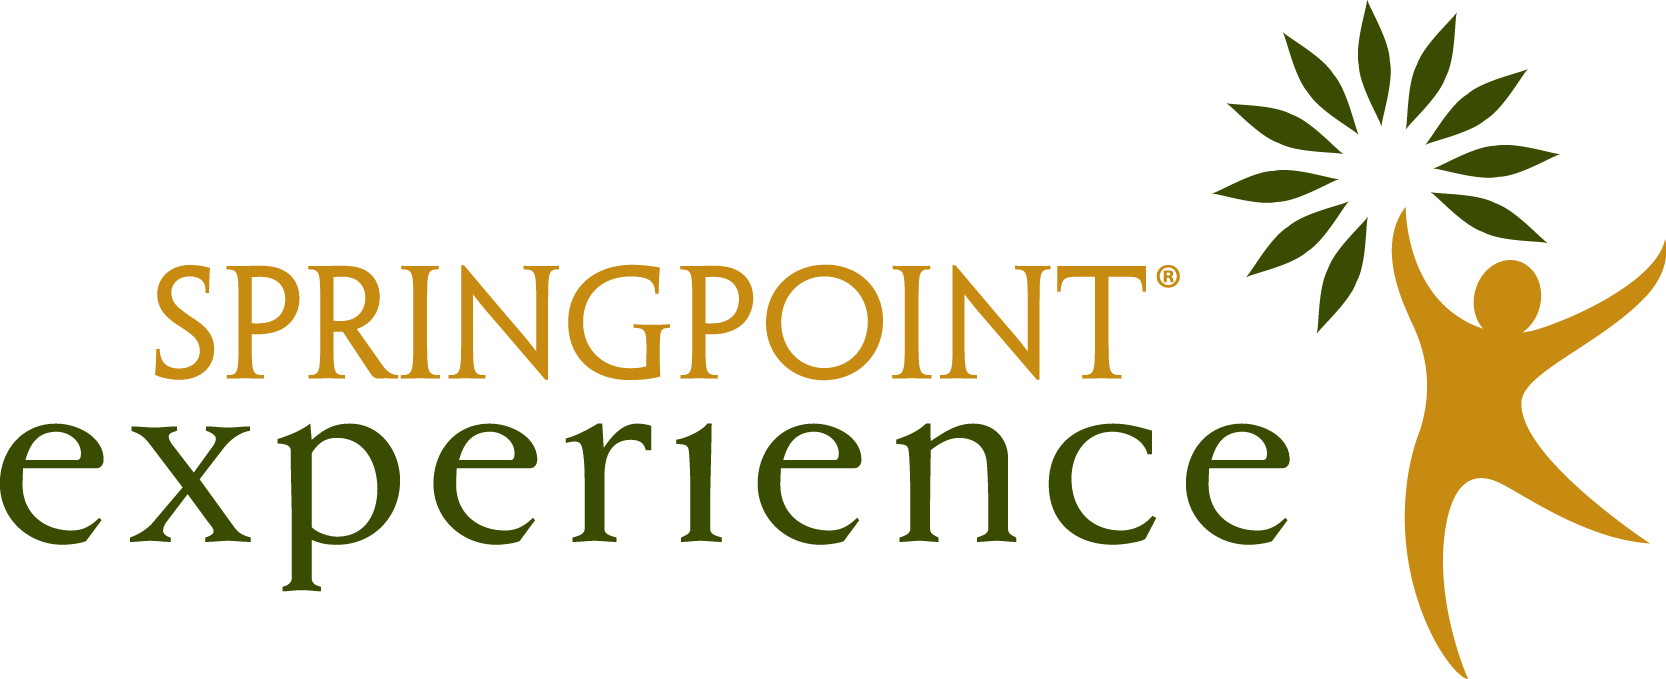 The Springpoint Experience logo